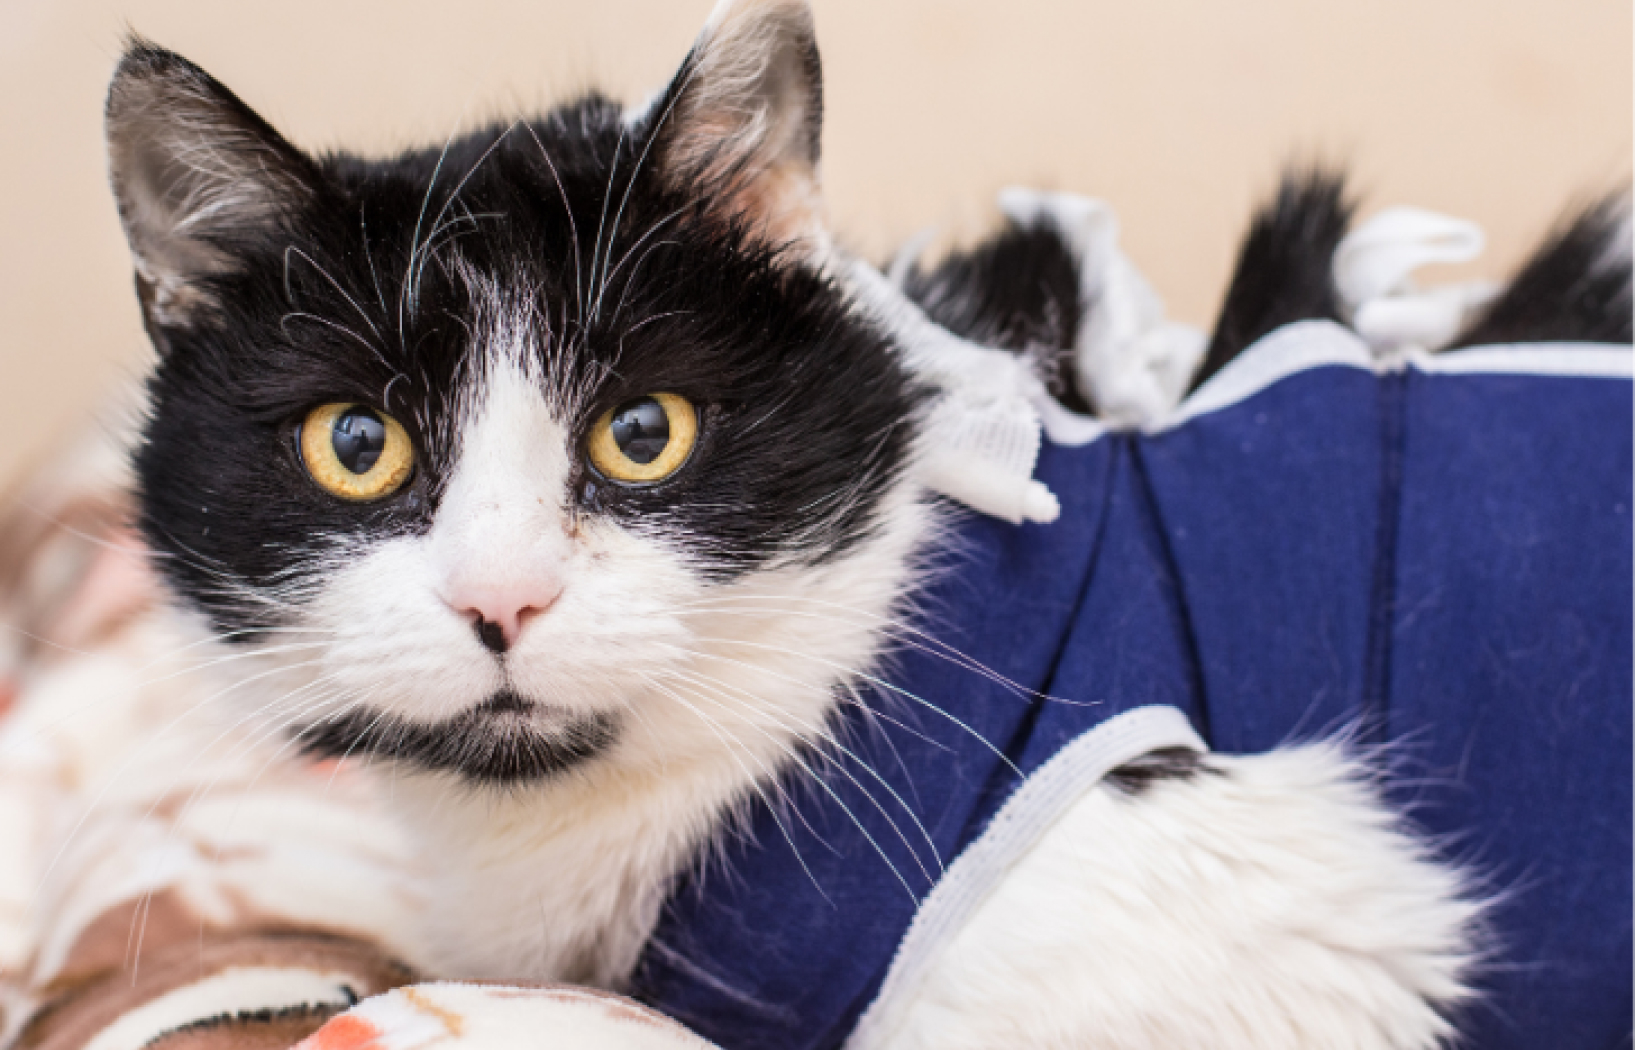 Learn to spot signs of illness and injury in cats and the steps you need to take before vet care is available.